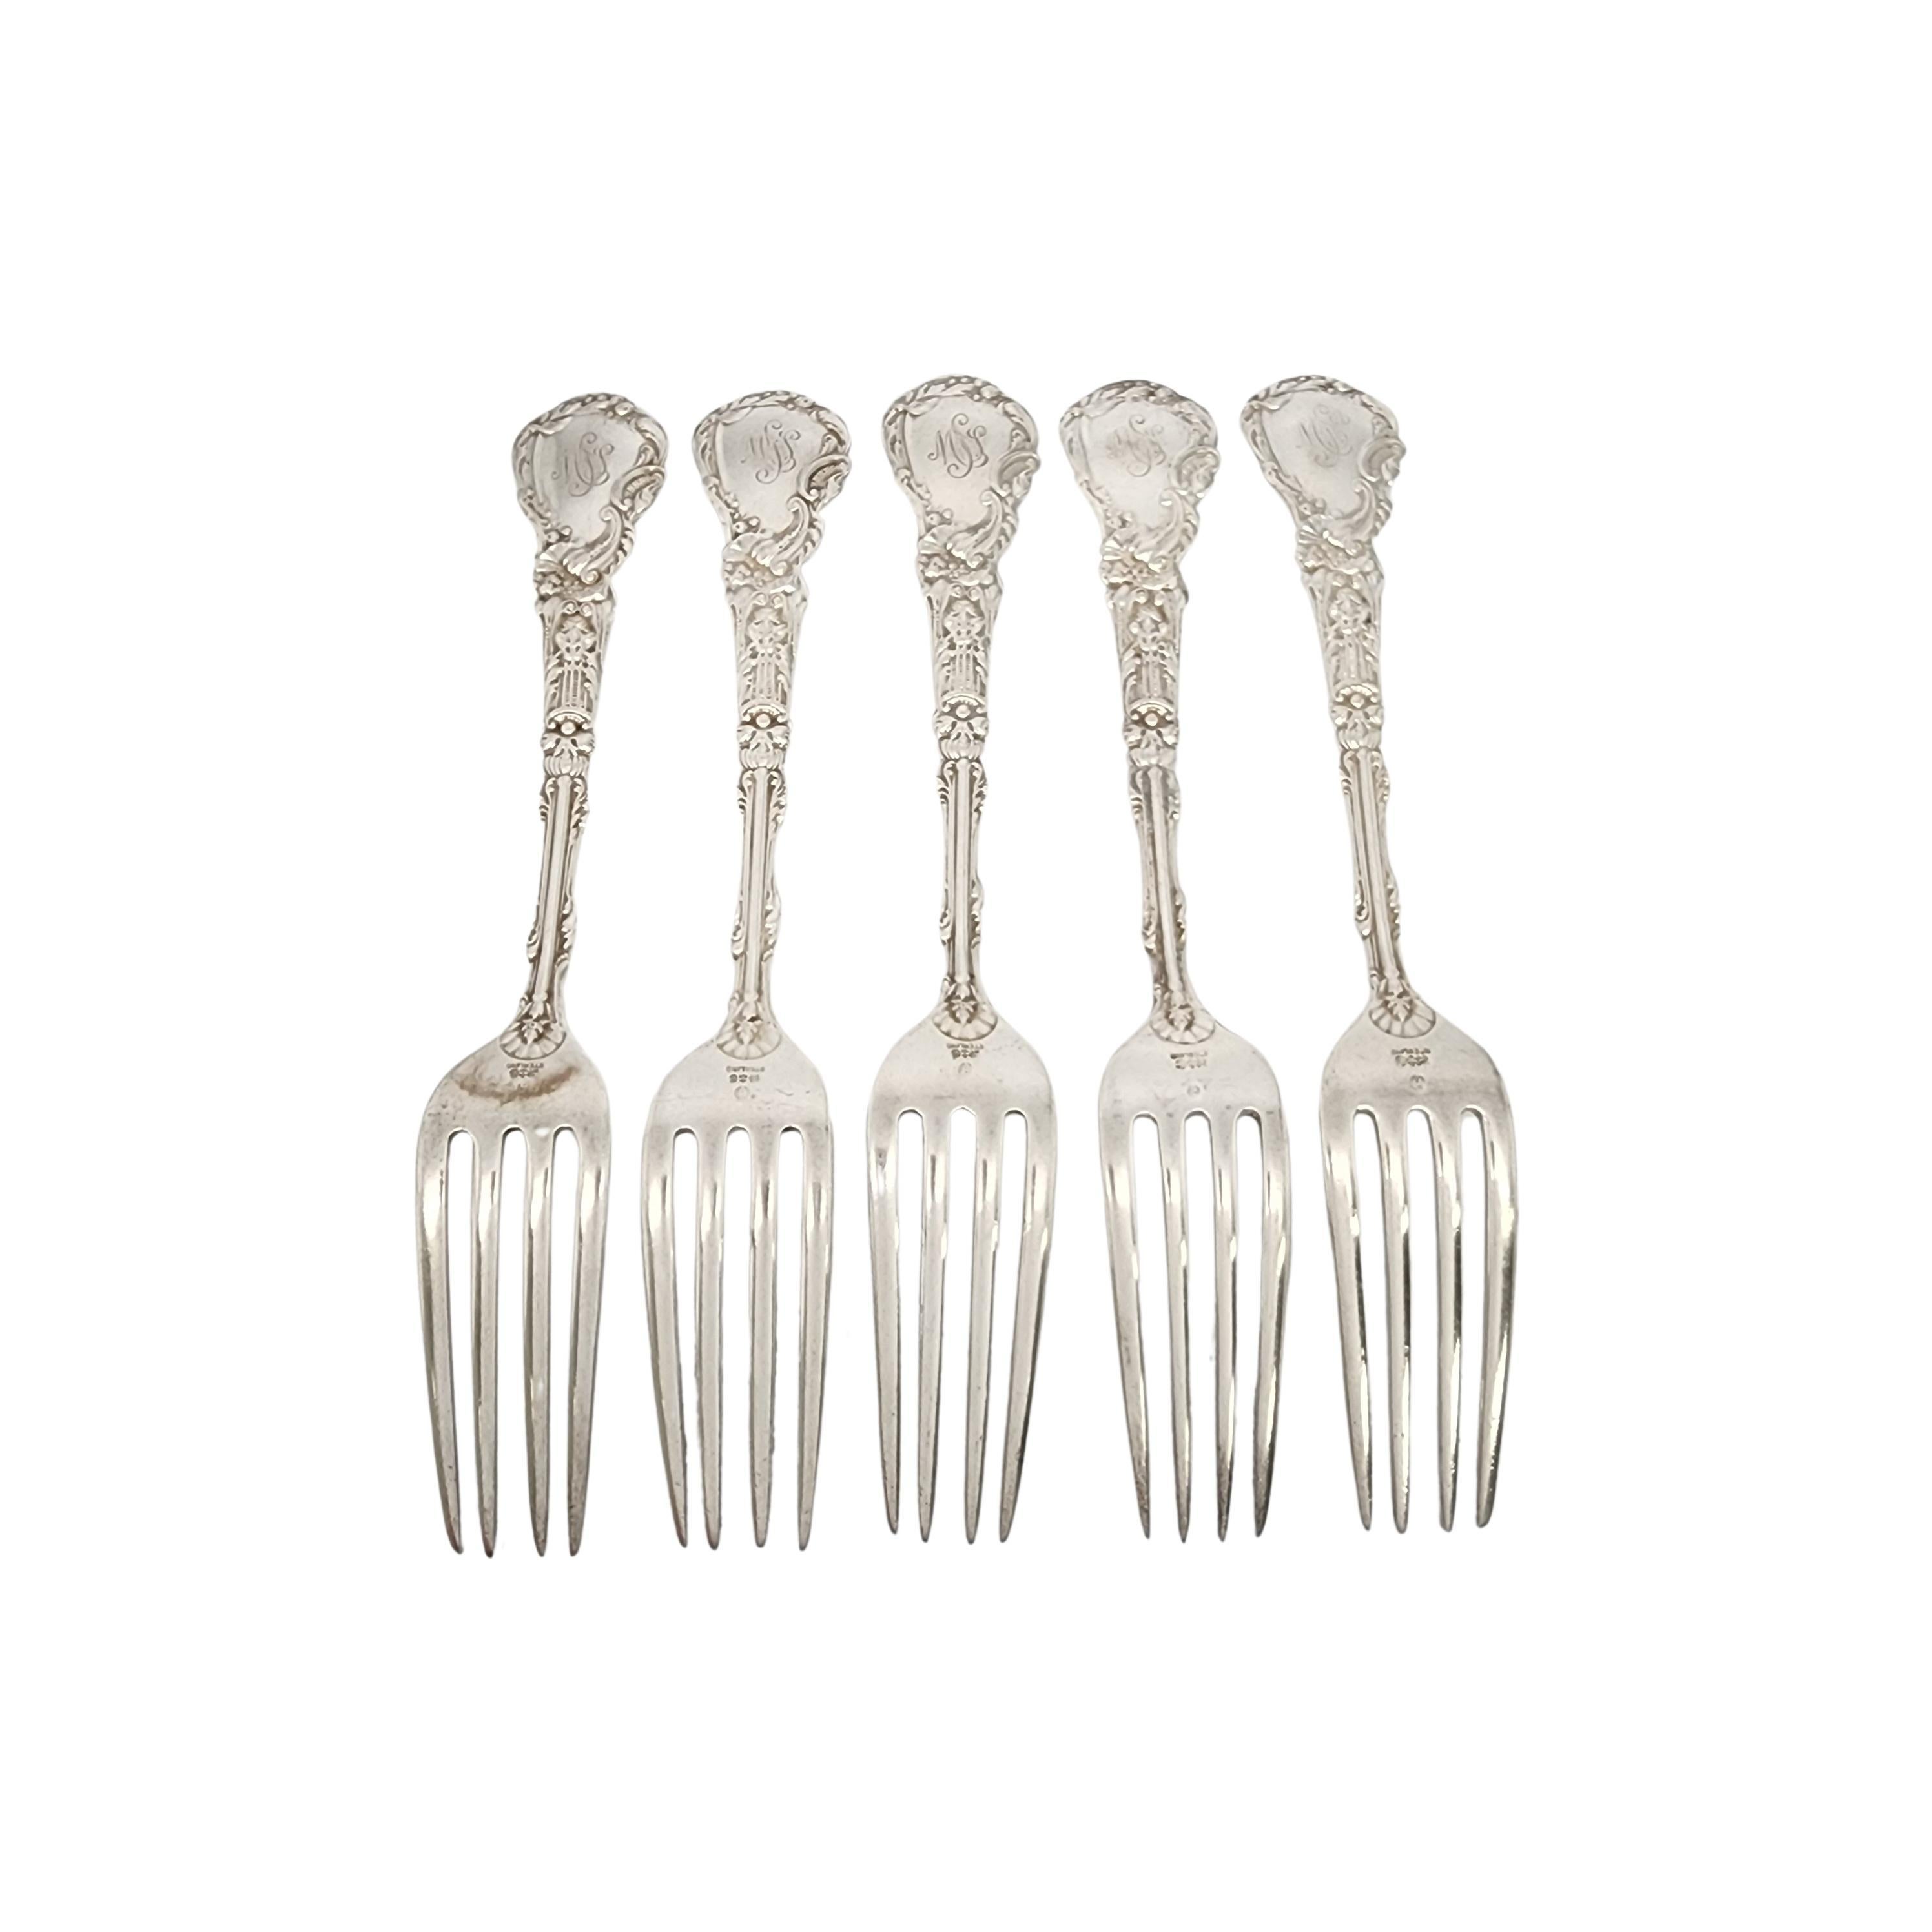 Set of 5 sterling silver forks in the Versailles pattern by Gorham.

Monogram appears to be MSJ (see photo).

Gorham's Versailles is a multi motif pattern designed by Antoine Heller in 1885. Named for the Palace of Versailles, the pattern depicts